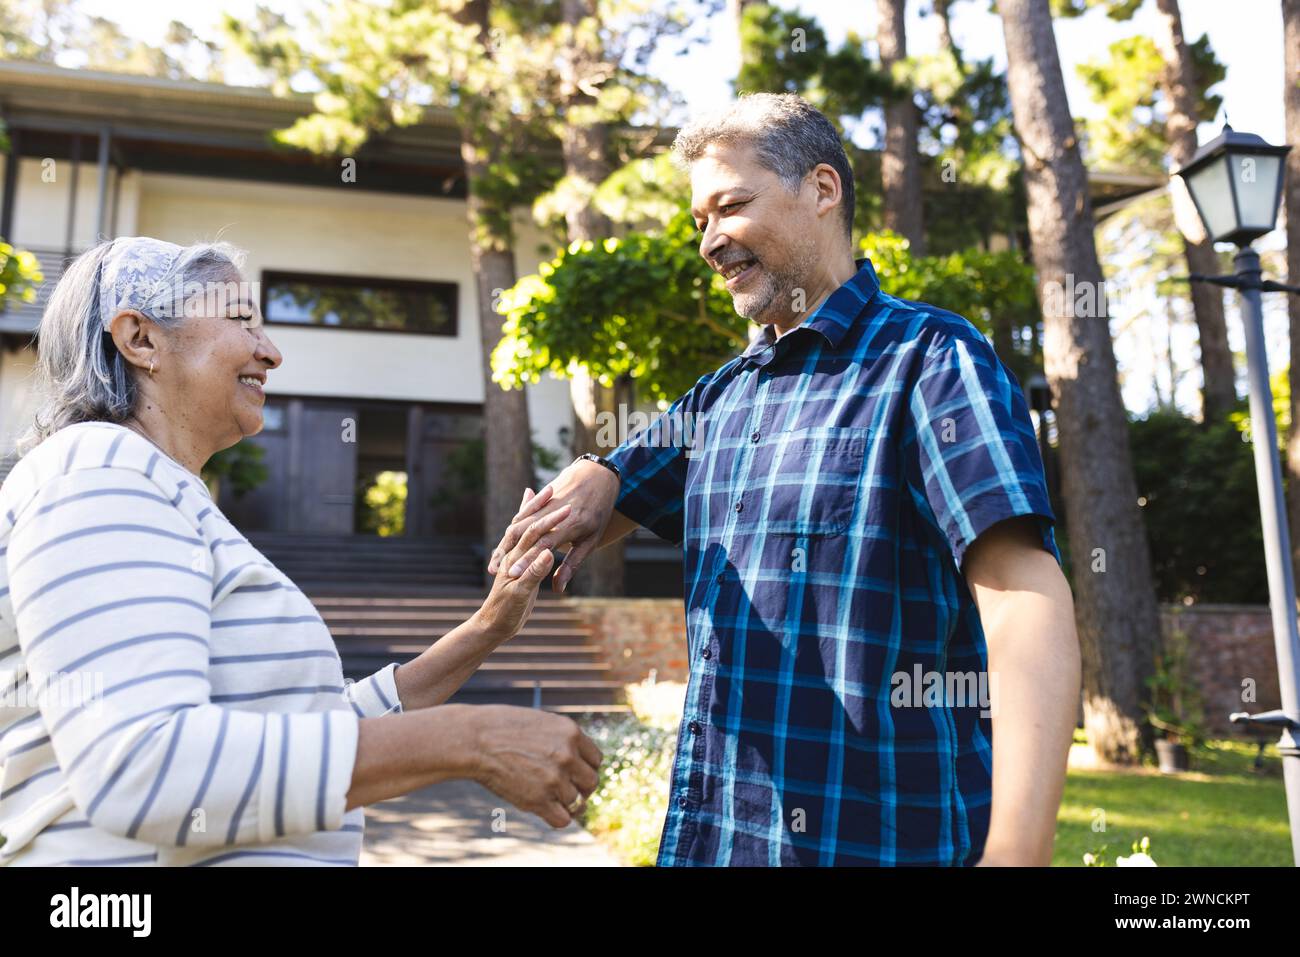 Senior biracial woman with white hair laughs with a biracial man outdoors Stock Photo